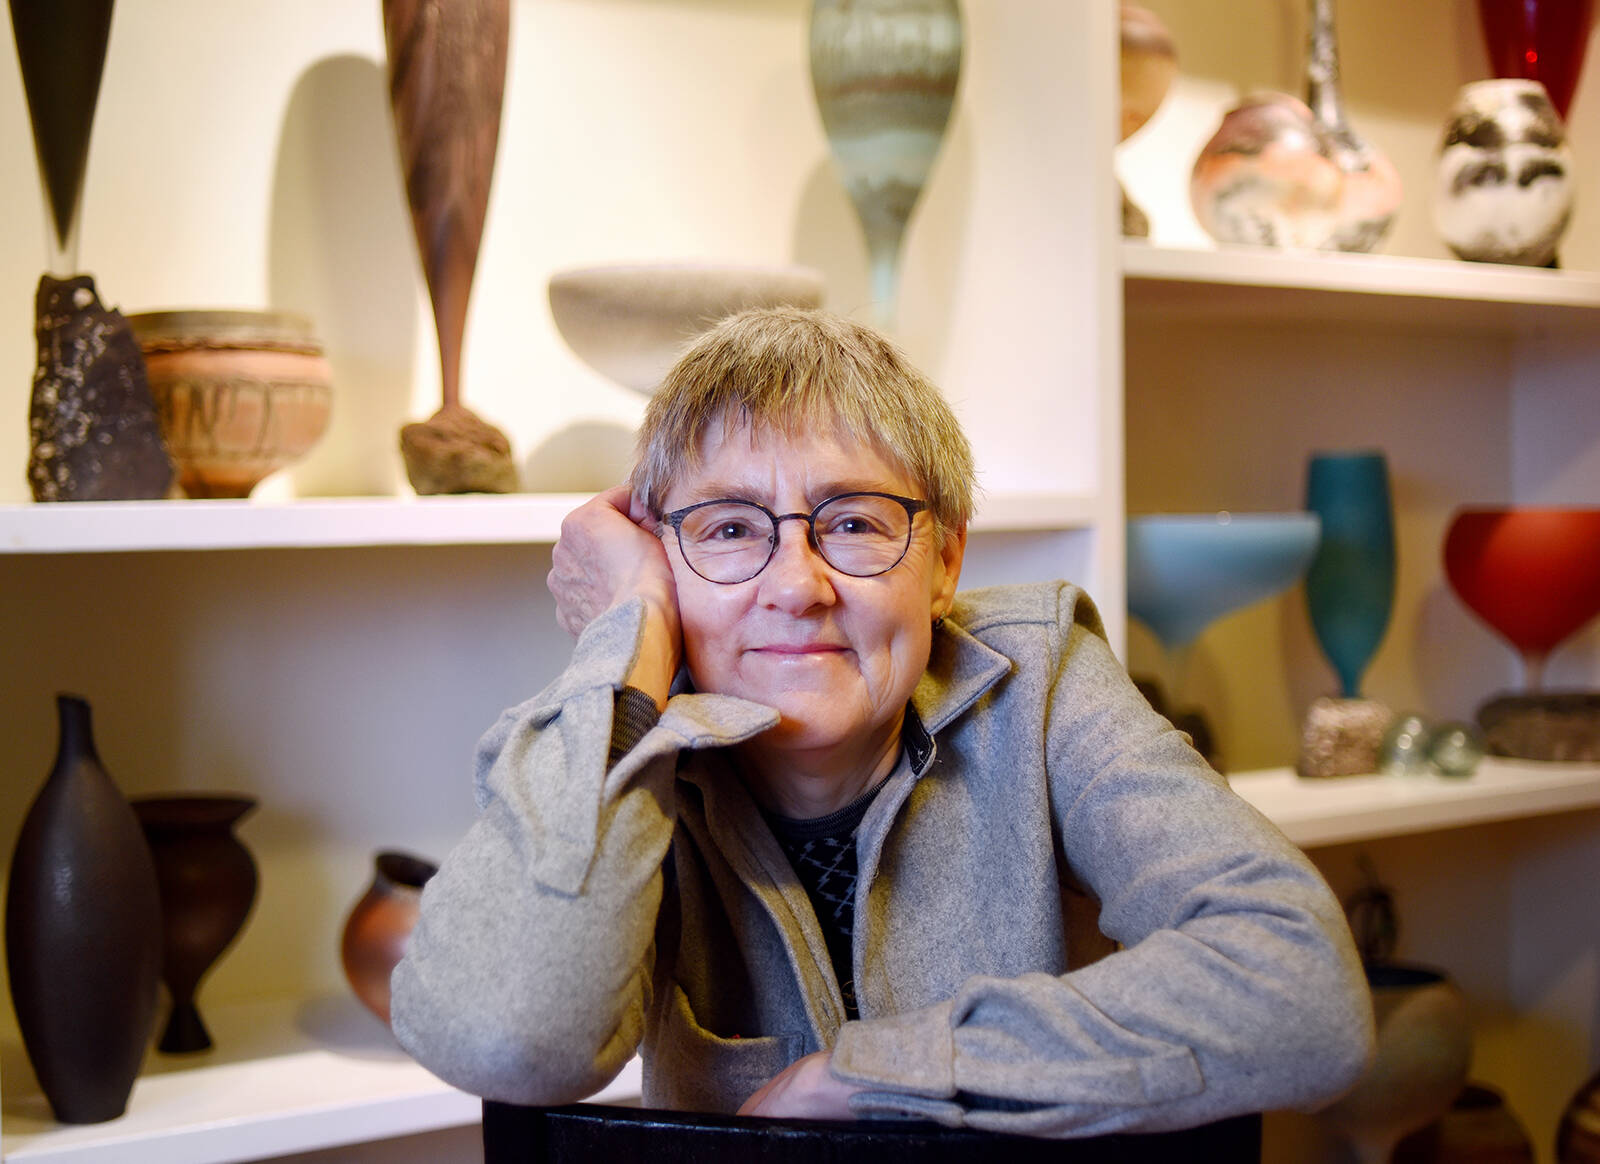 January 12, 2023 - Pottery artist Mary Fox in her Ladysmith home studio with some of her creations. Don Denton photo